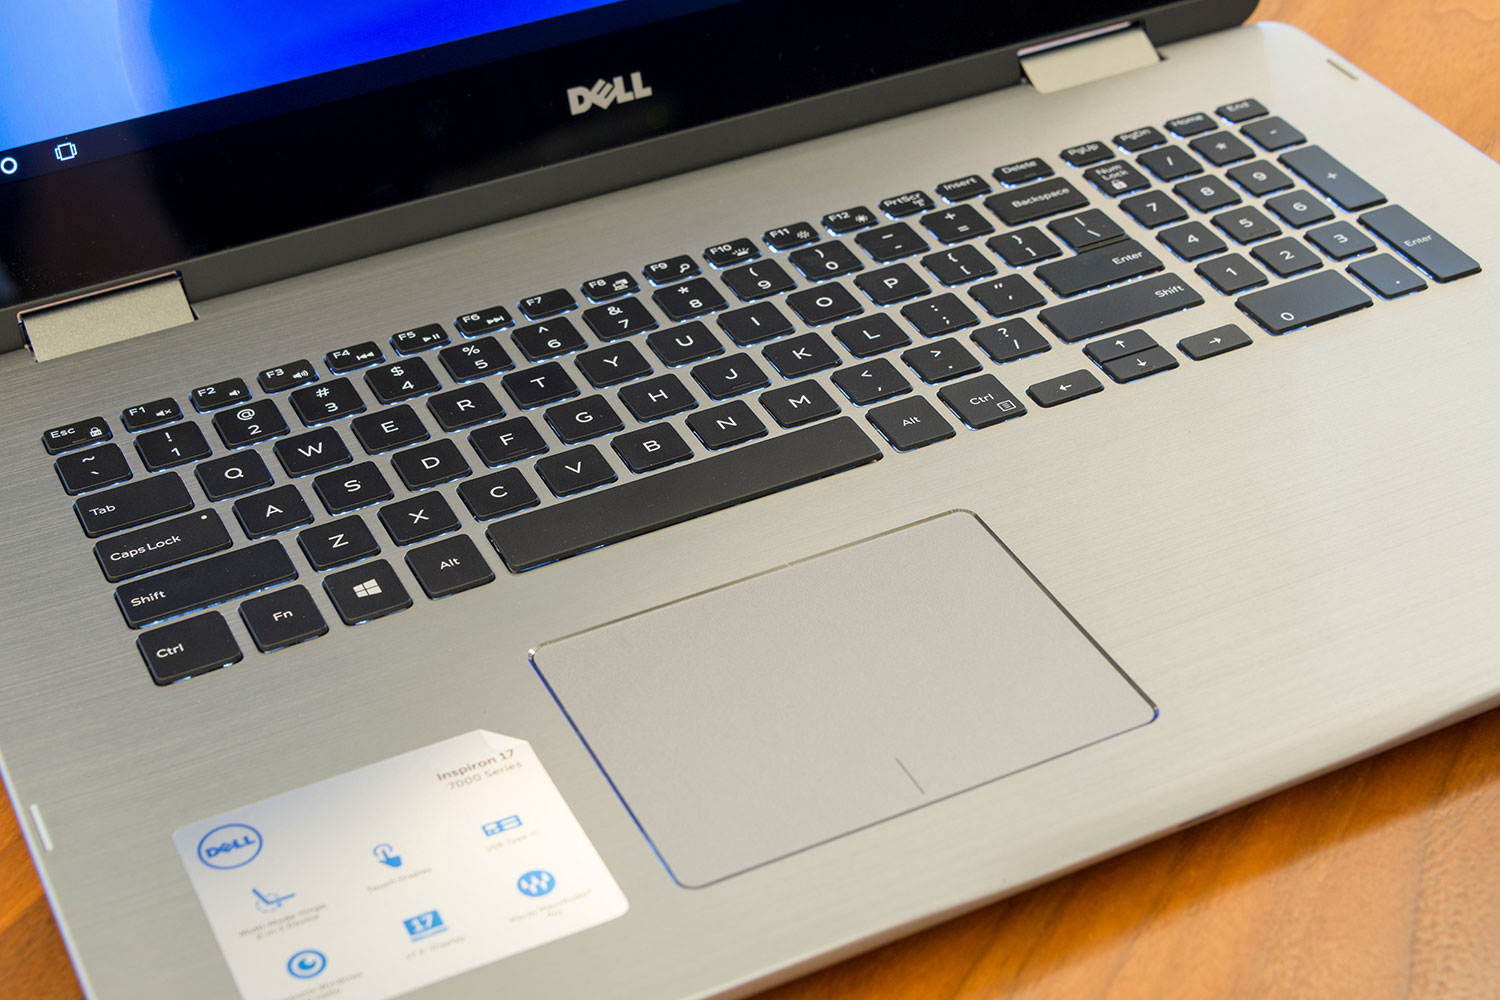 Dell Inspiron 17 7000 2-in-1 (2016) Review | Digital Trends